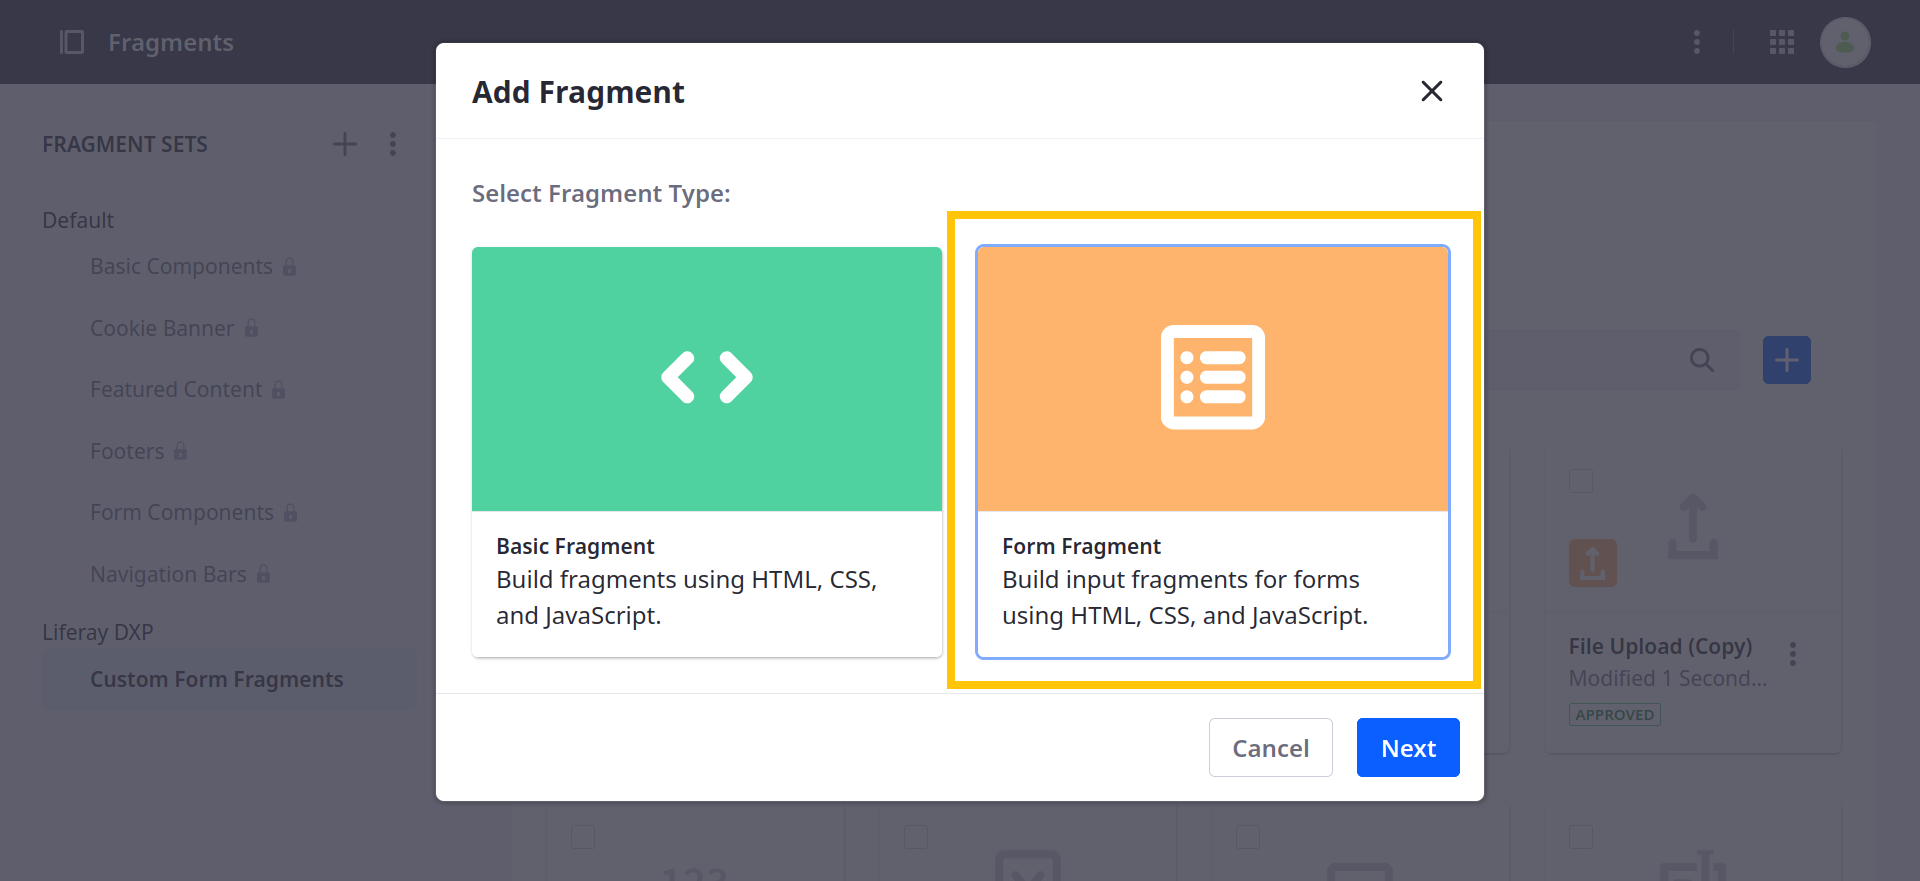 Select the form fragment type and click Next.